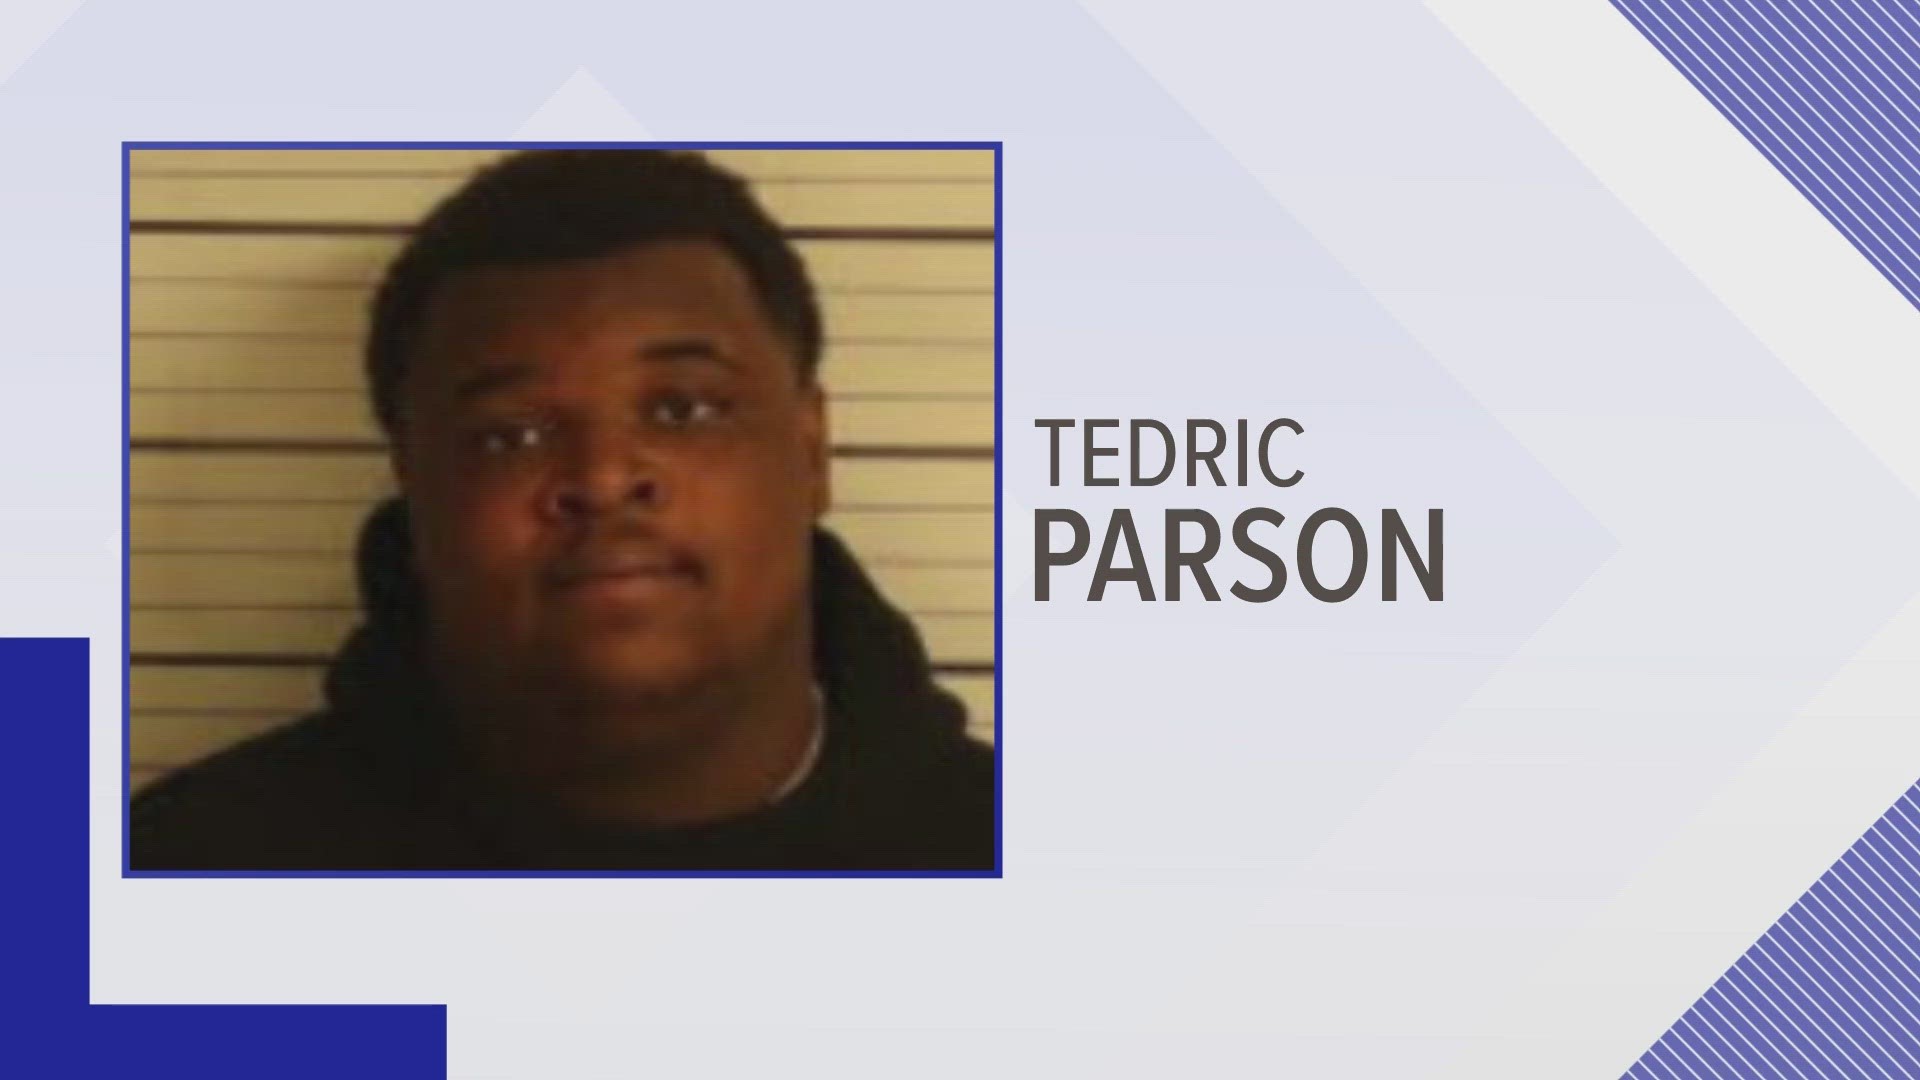 Tedric Parson is facing several charges for multiple smash-and-grabs across Memphis.